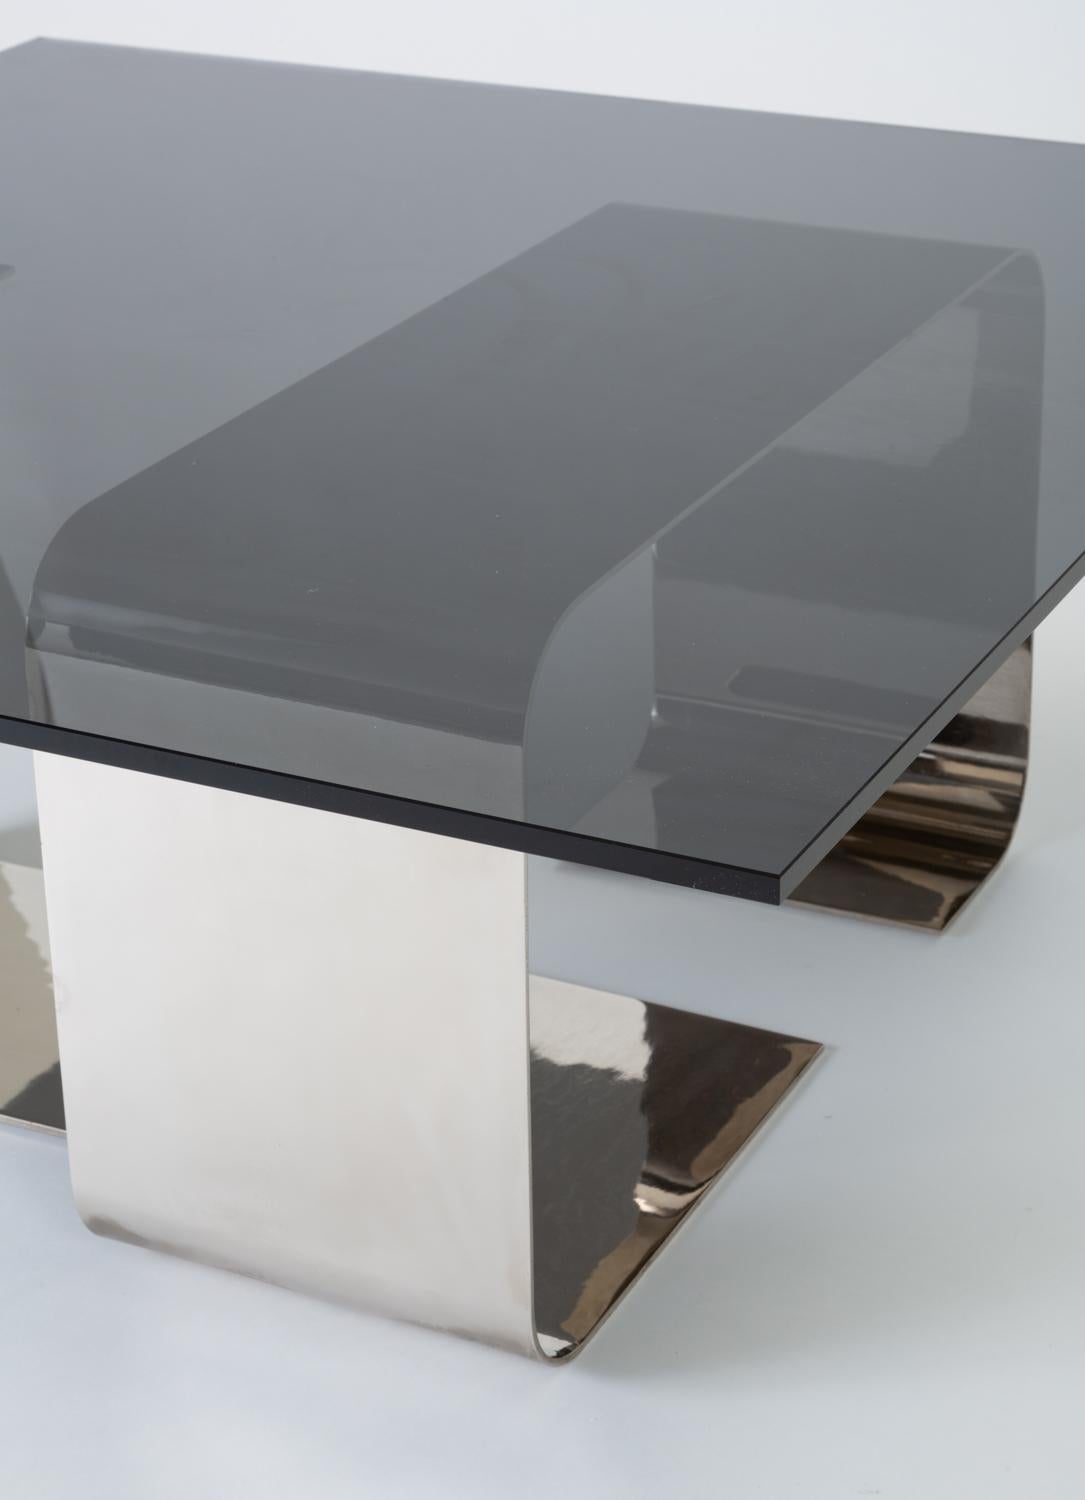 Polished Steel and Smoked Glass Coffee Table by François Monnet for Kappa 10